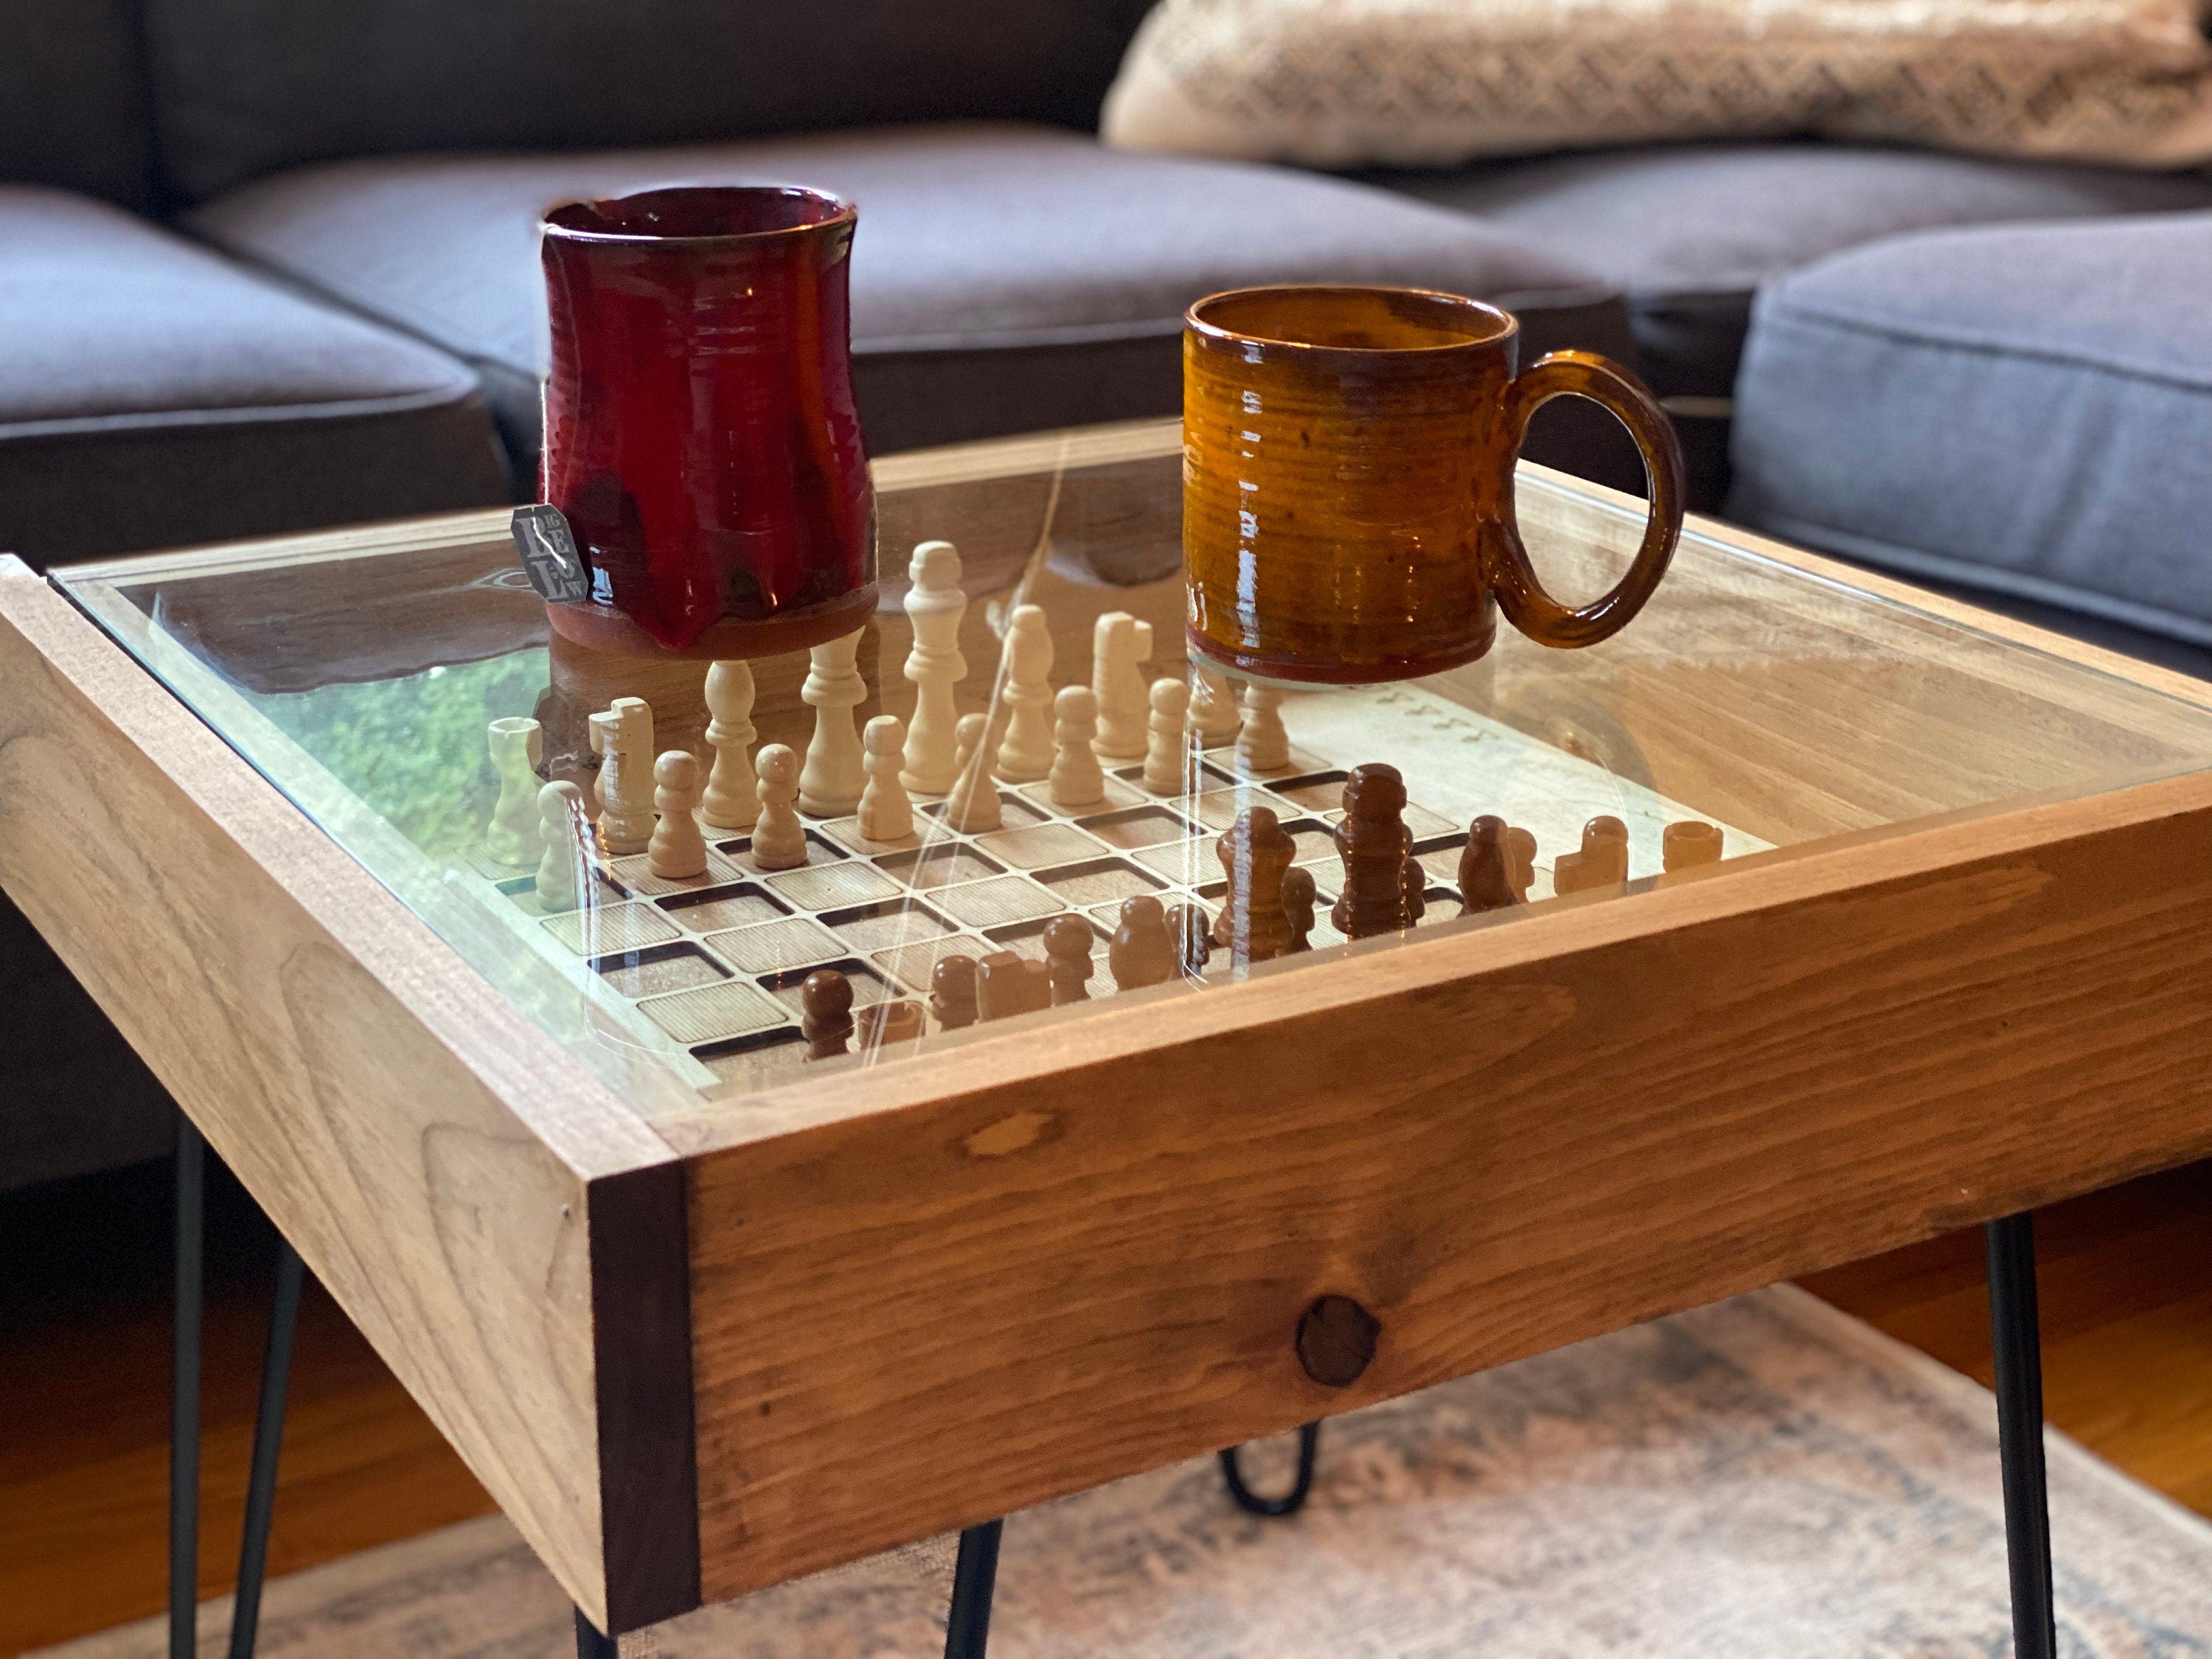 Rustic Chess and Checkers Table with removable glass top - chess and checkers pieces included. 100% Made in the USA